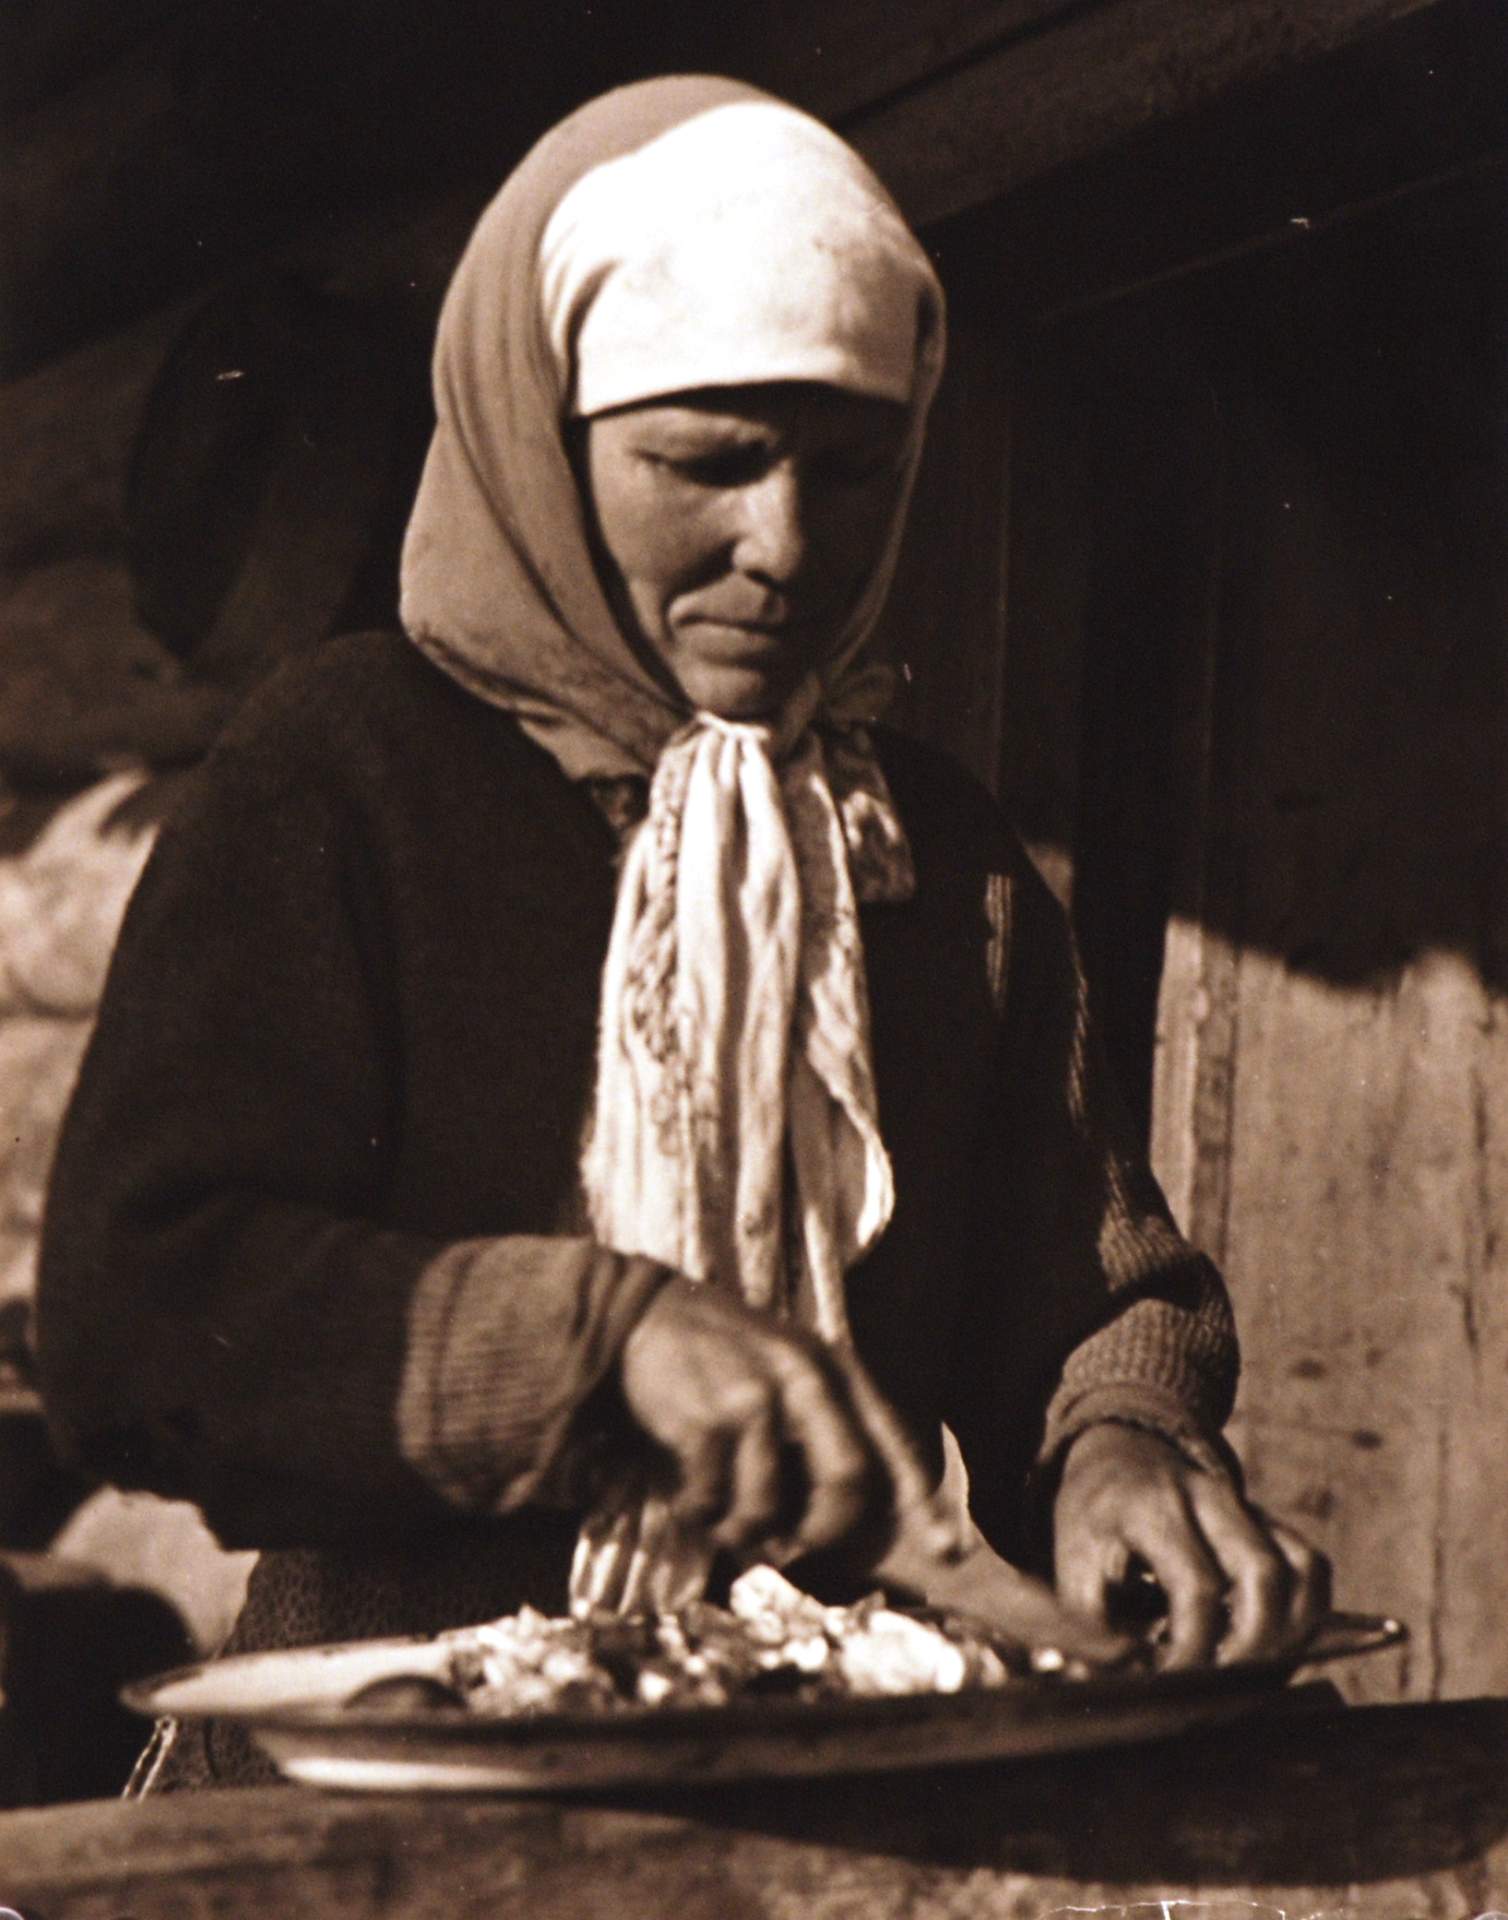 Untitled [woman cutting vegetables]